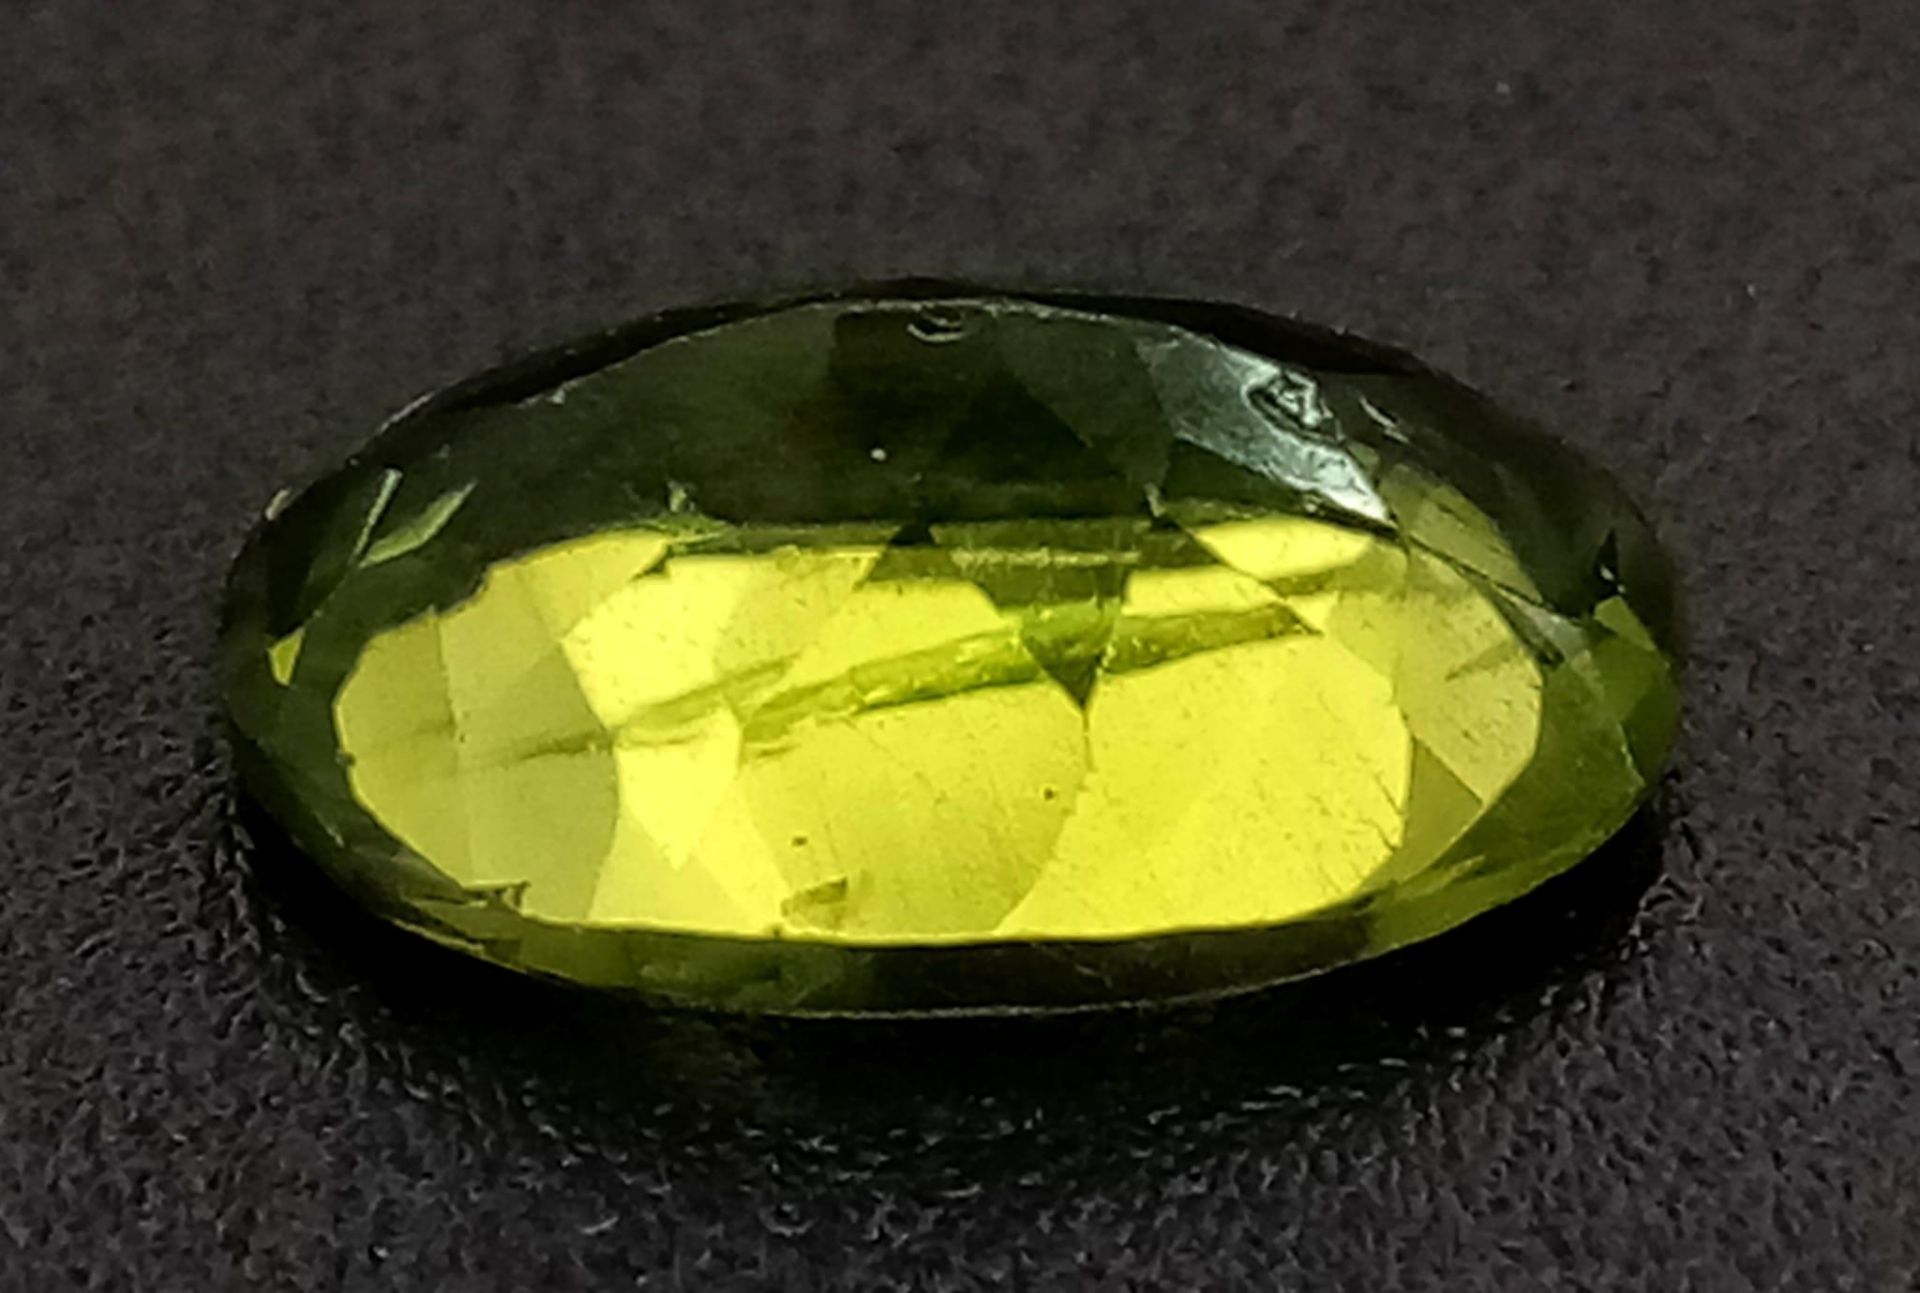 2.75ct Oval Cut, Natural Peridot. GLI Certification included. - Image 3 of 4